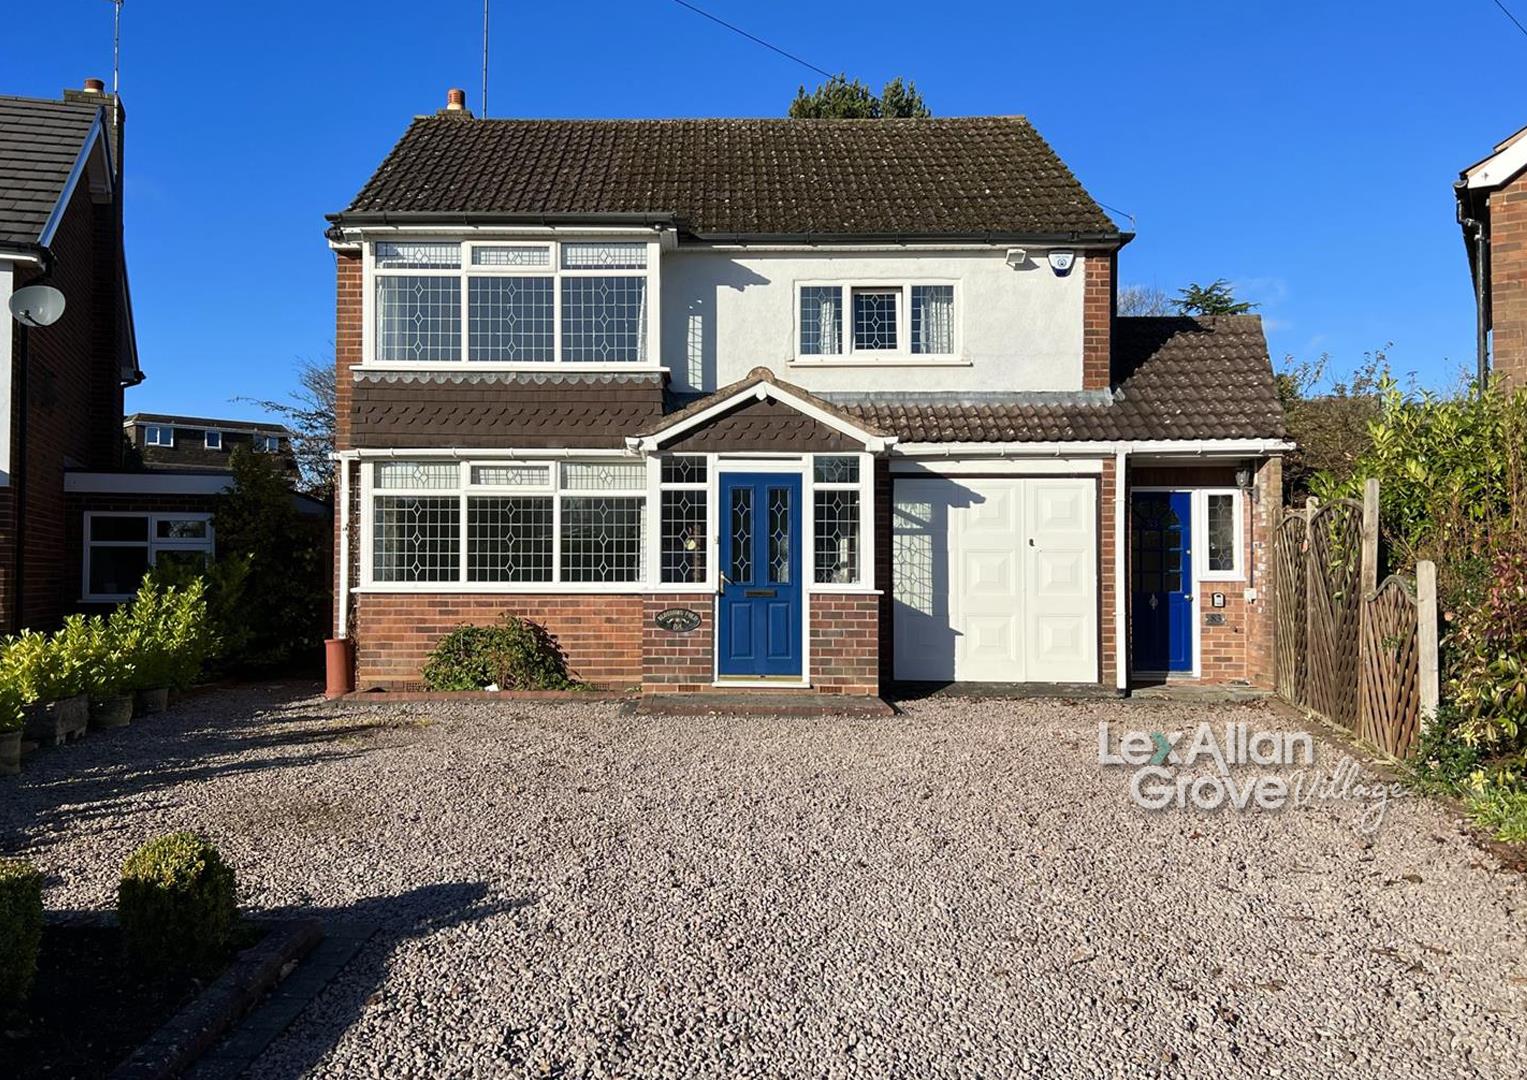 3 bed house for sale  - Property Image 1